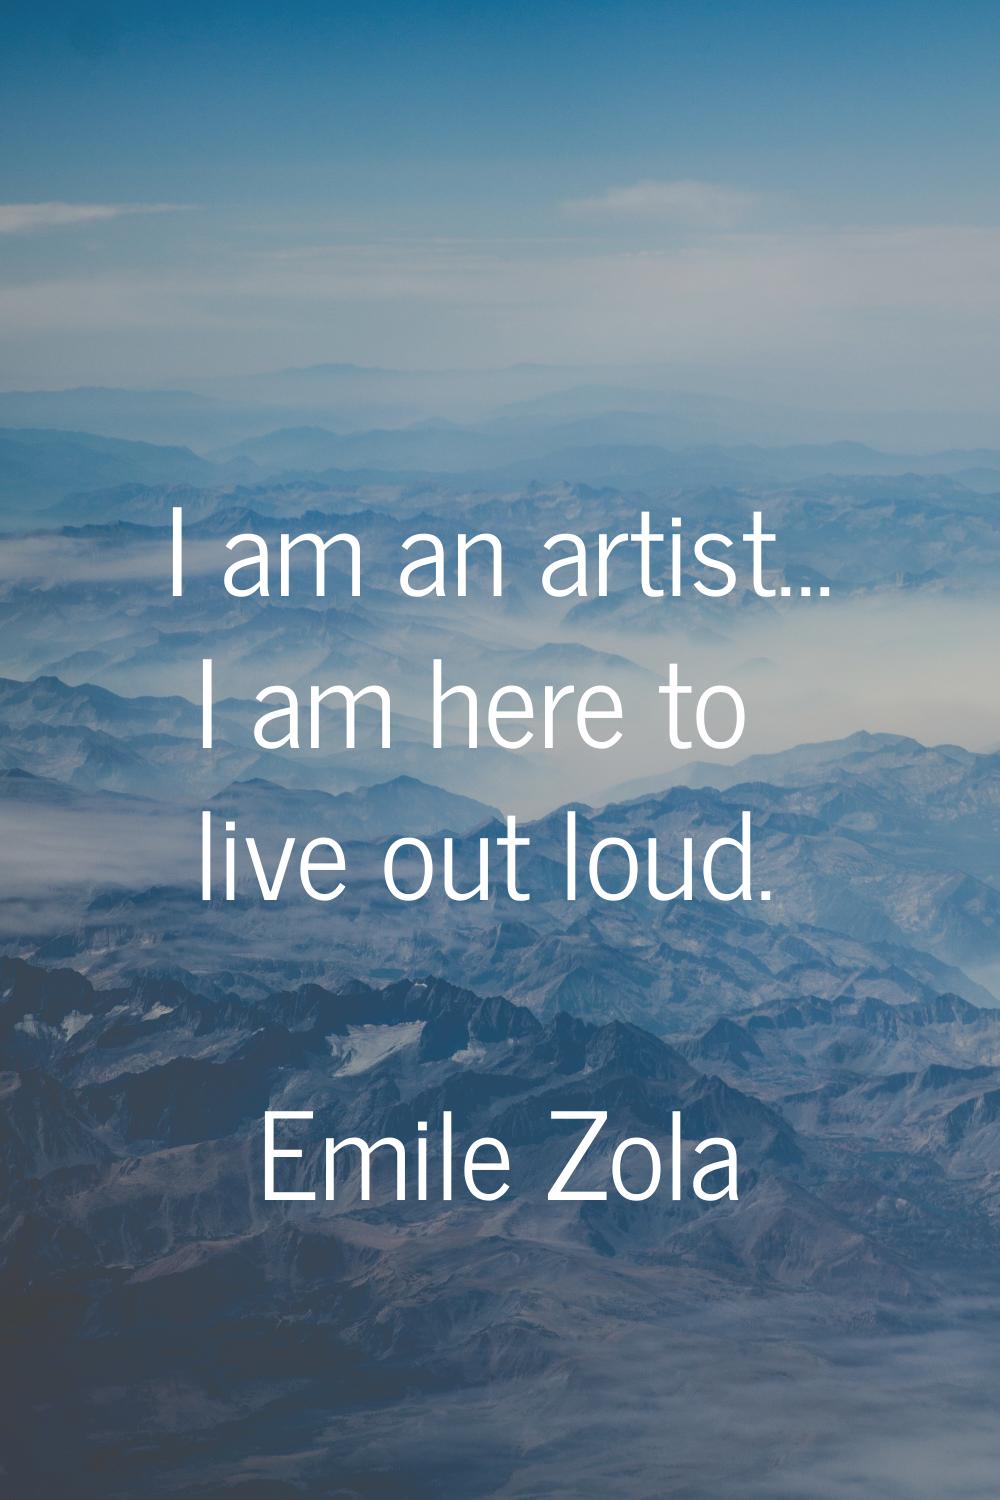 I am an artist... I am here to live out loud.